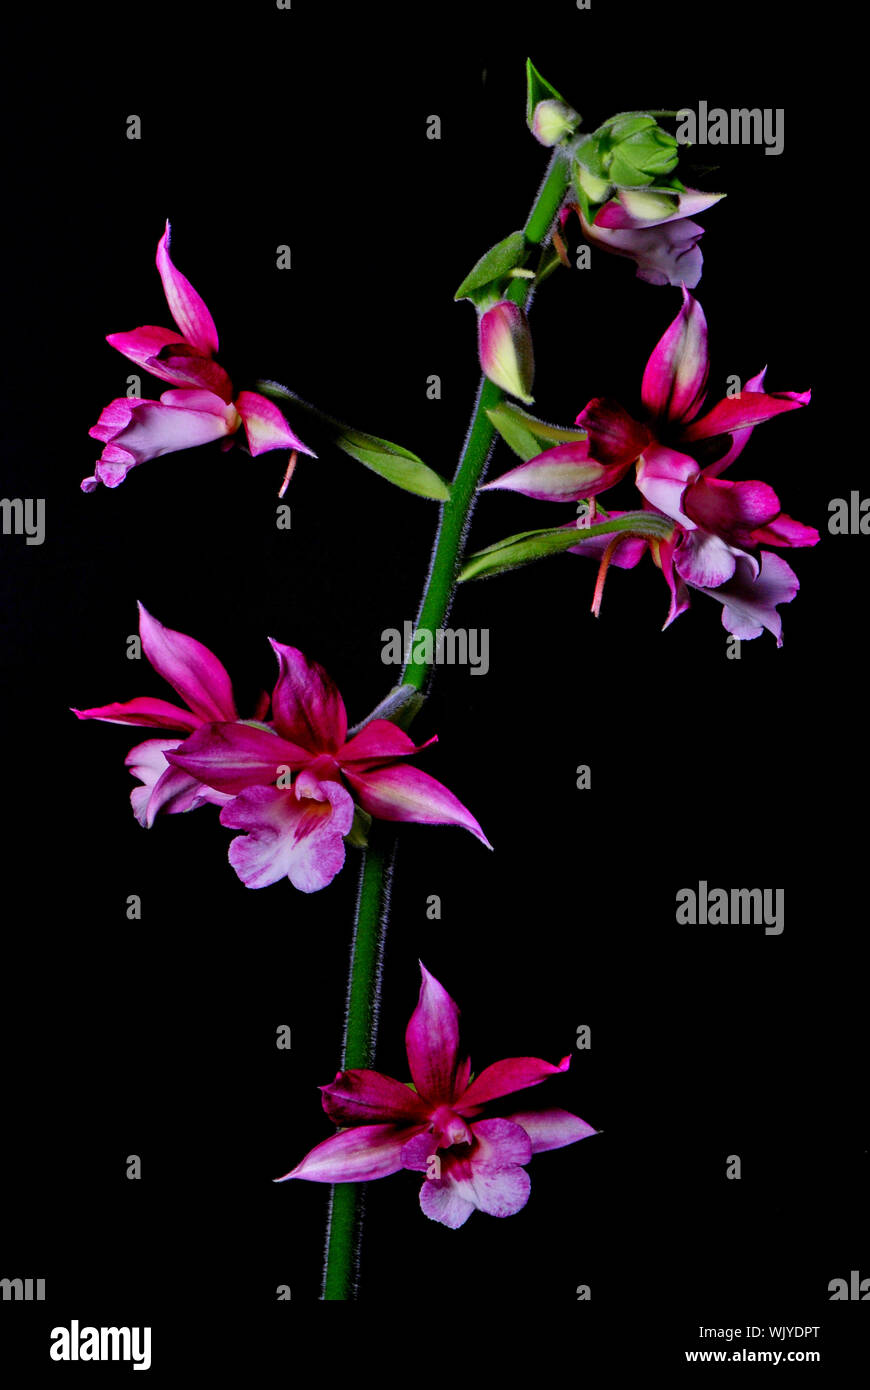 Calanthe hybrid, red colorful flower Stock Photo